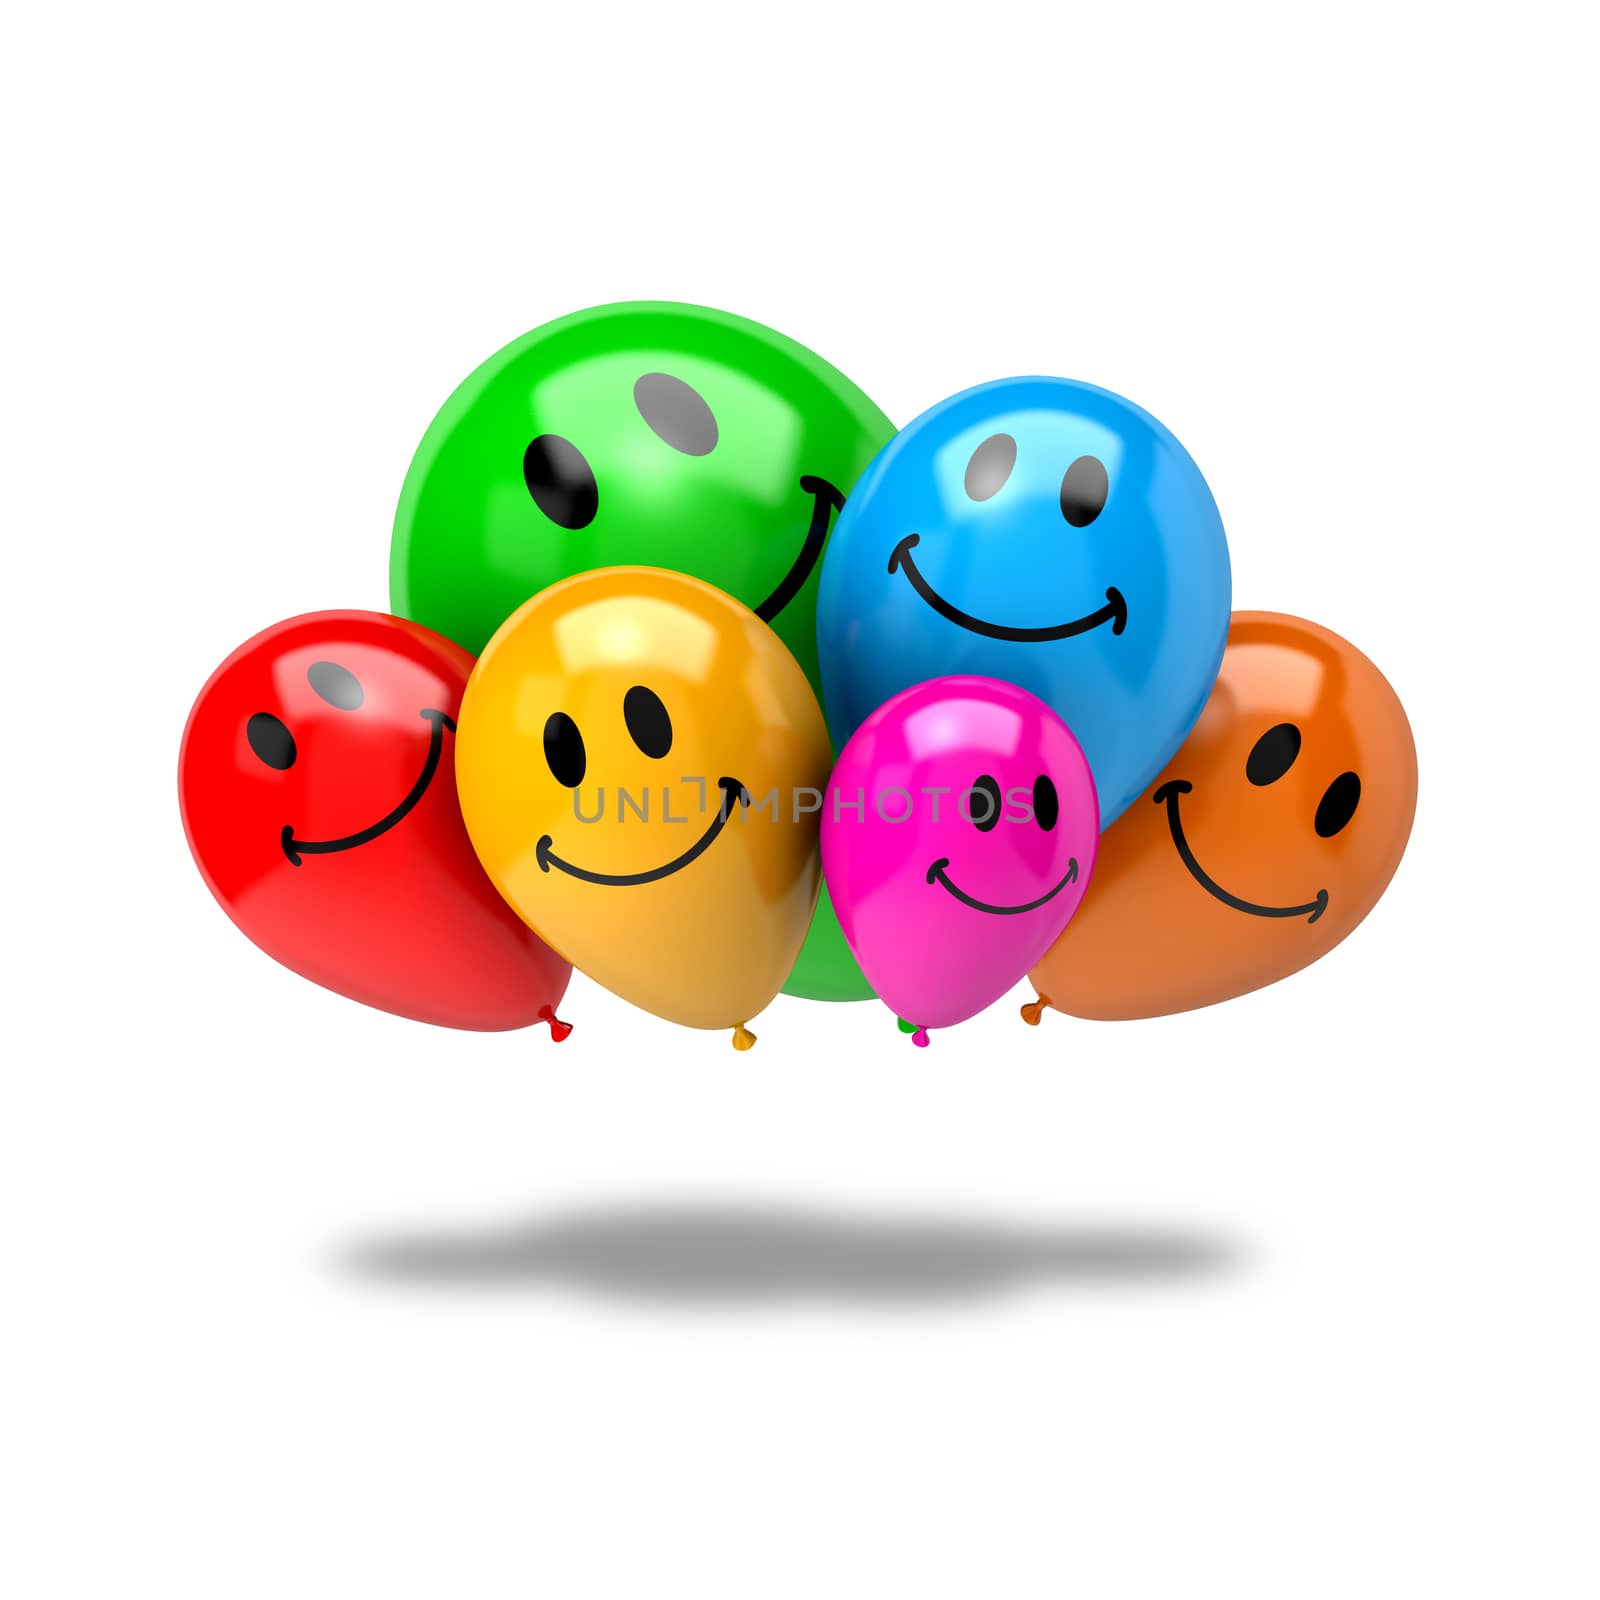 Bunch of Vibrant Color Balloons with Smiling Face Isolated on White Background 3D Illustration, Friendship Concept
